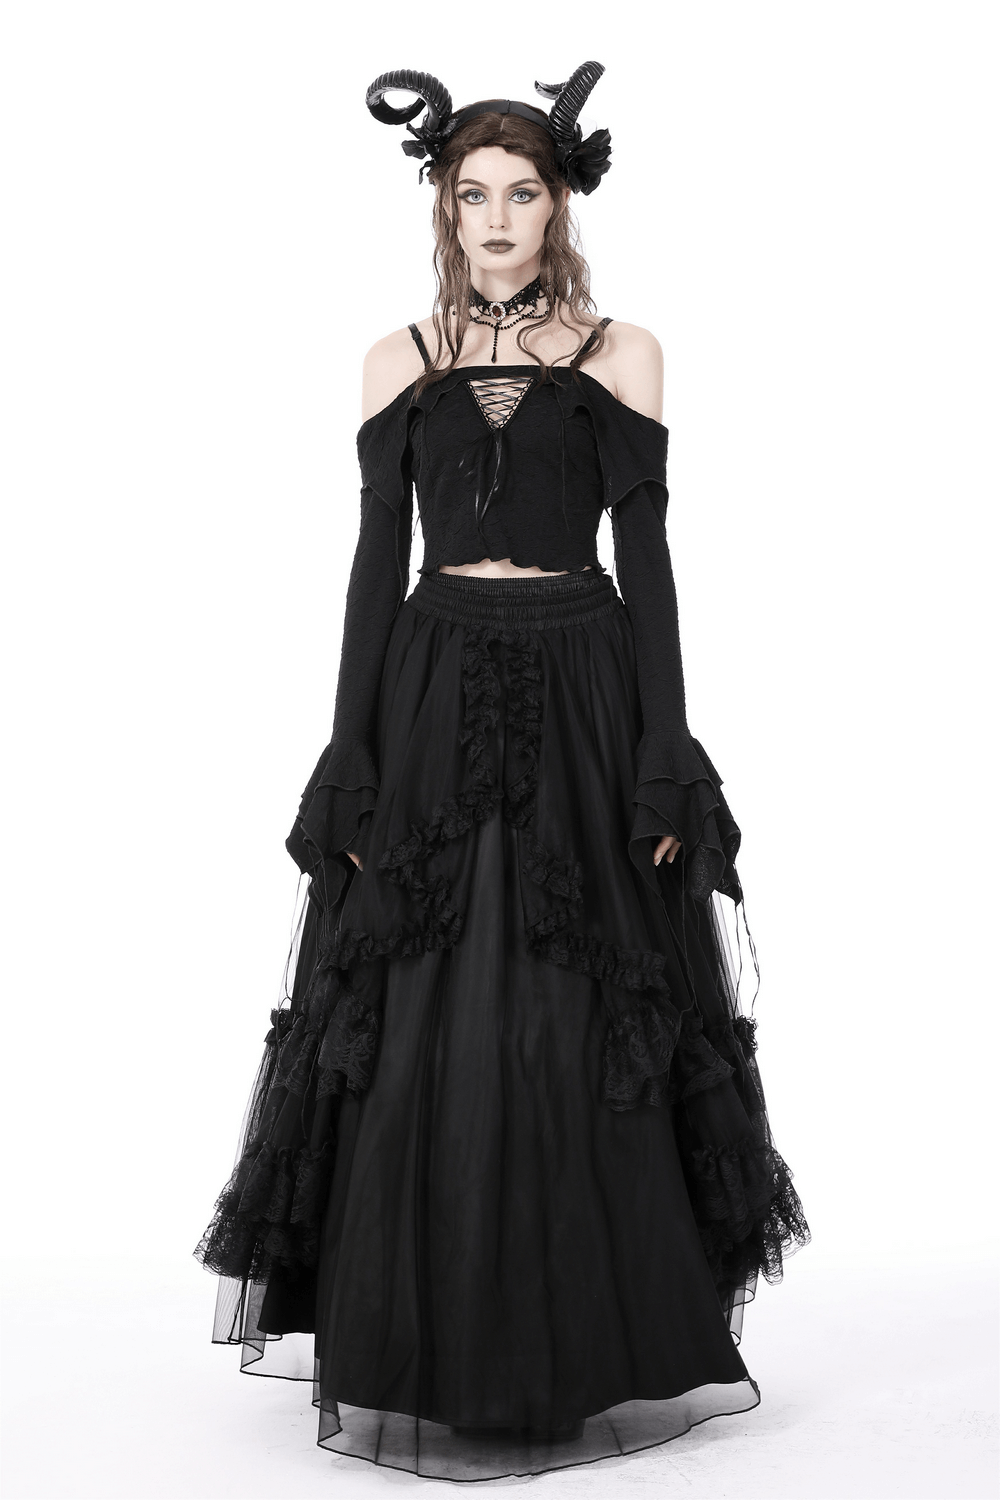 Gothic Pleated Off-Shoulder Cutout Top for Women